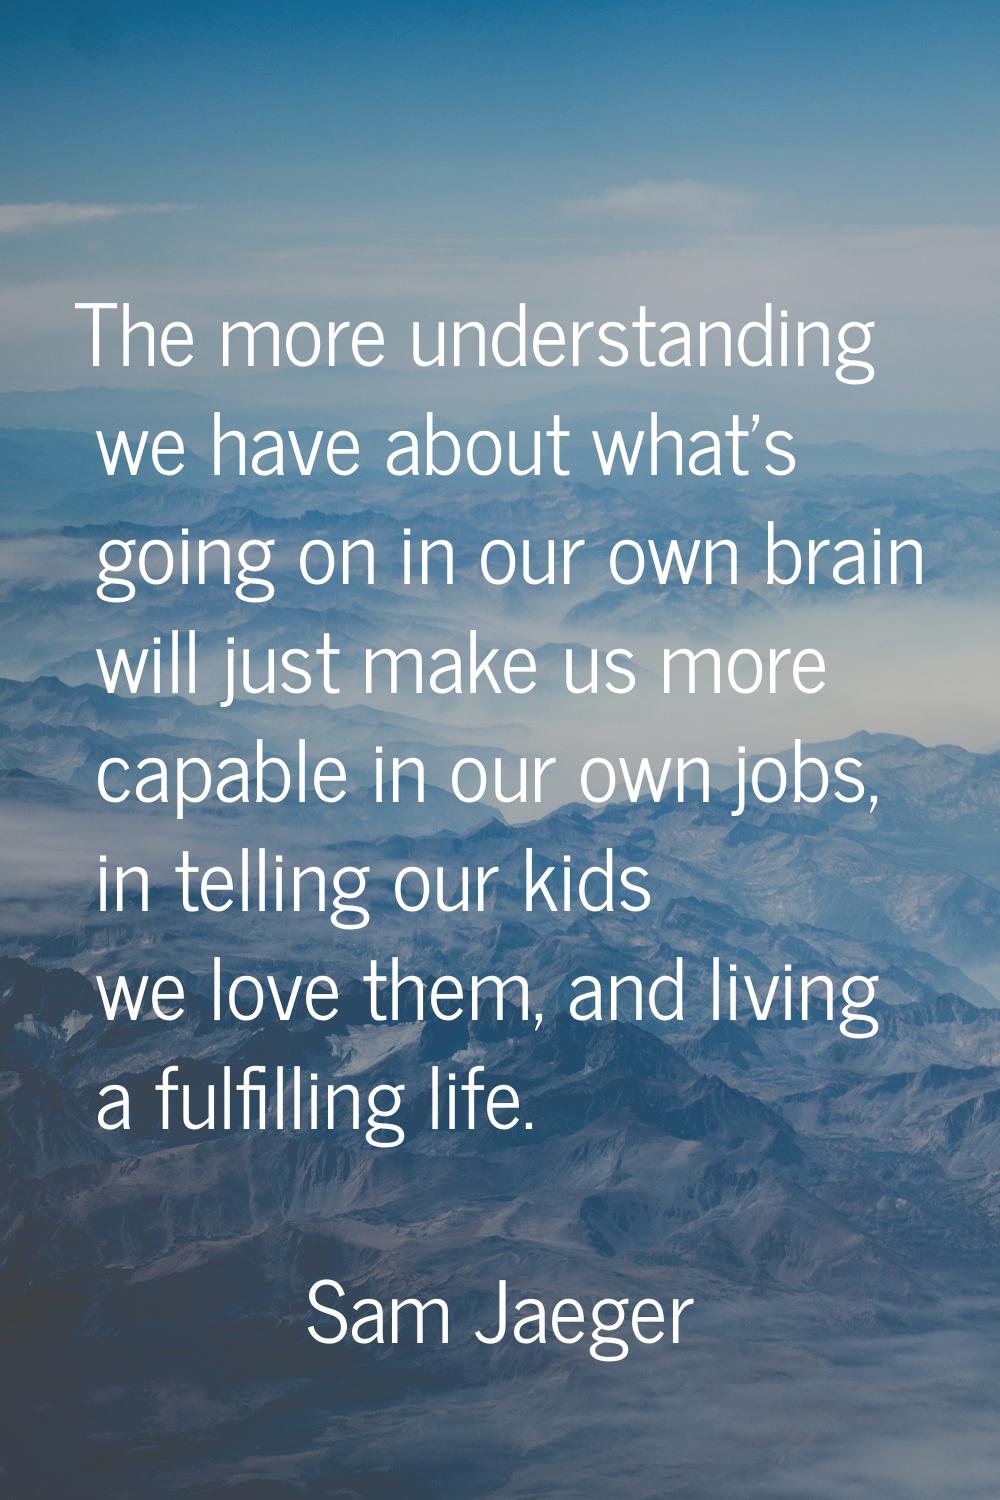 The more understanding we have about what's going on in our own brain will just make us more capabl